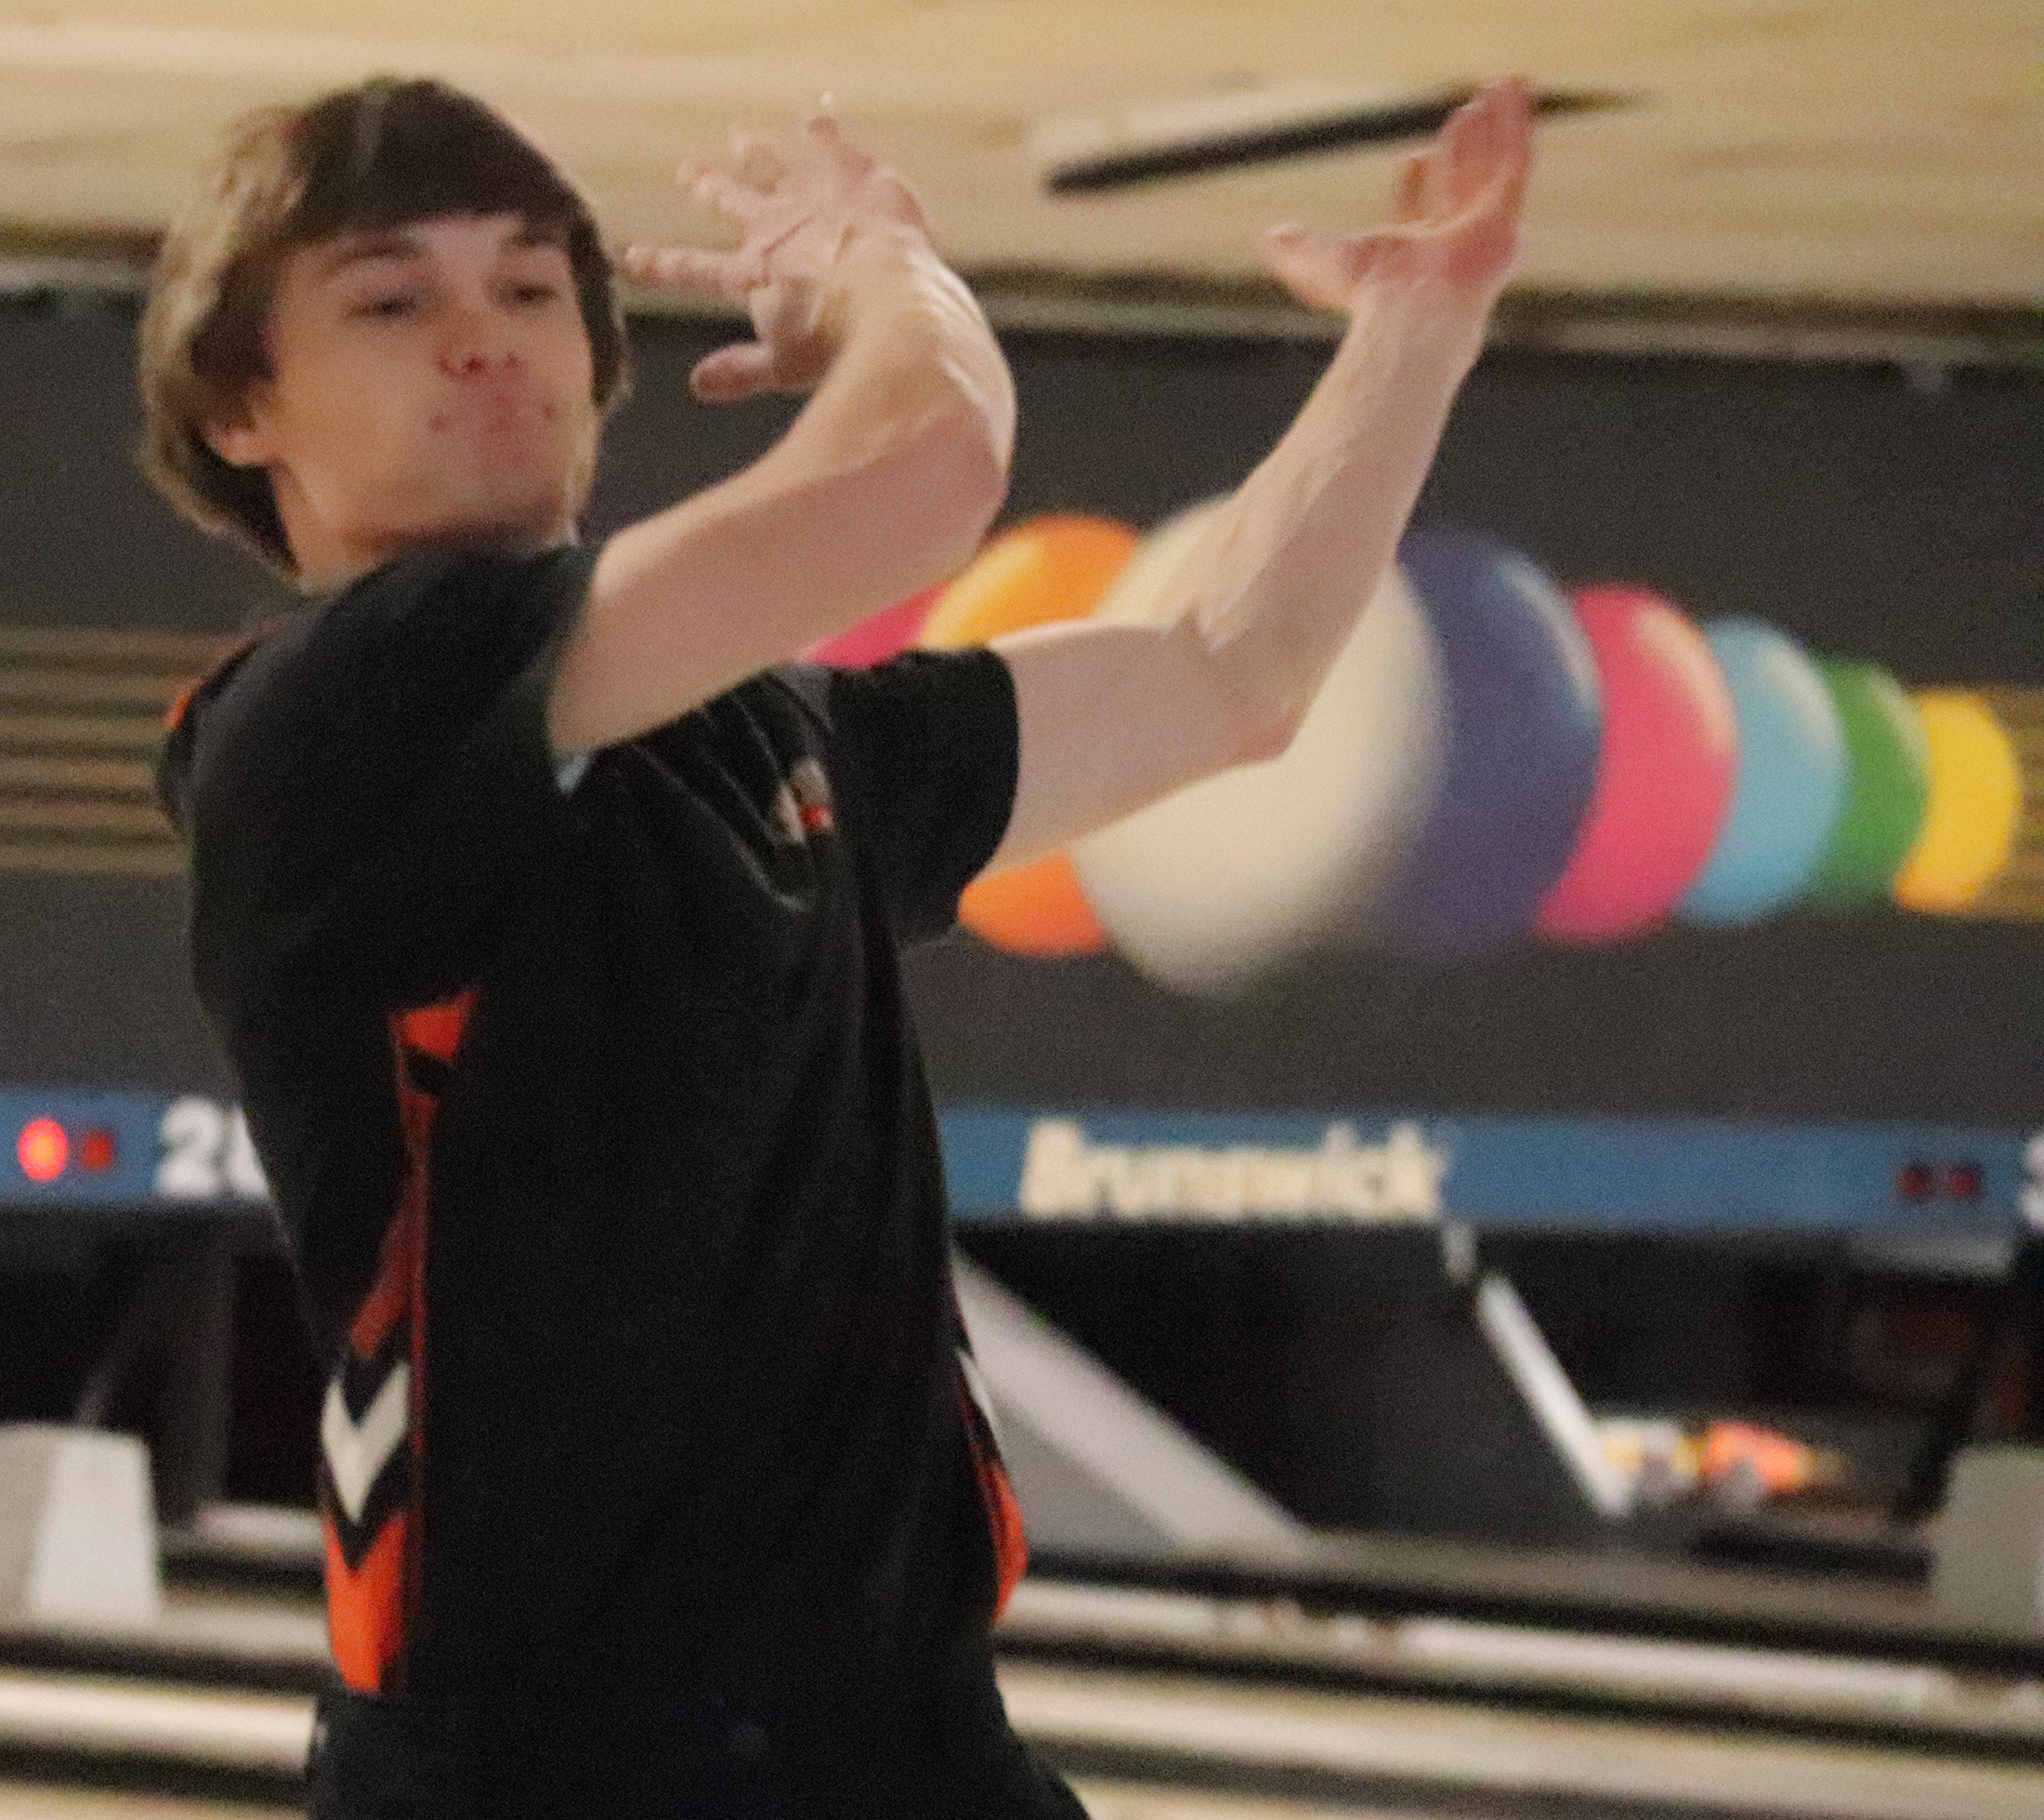 Comet Cael Bohlen makes championship bracket at State Bowling Individual Tournament